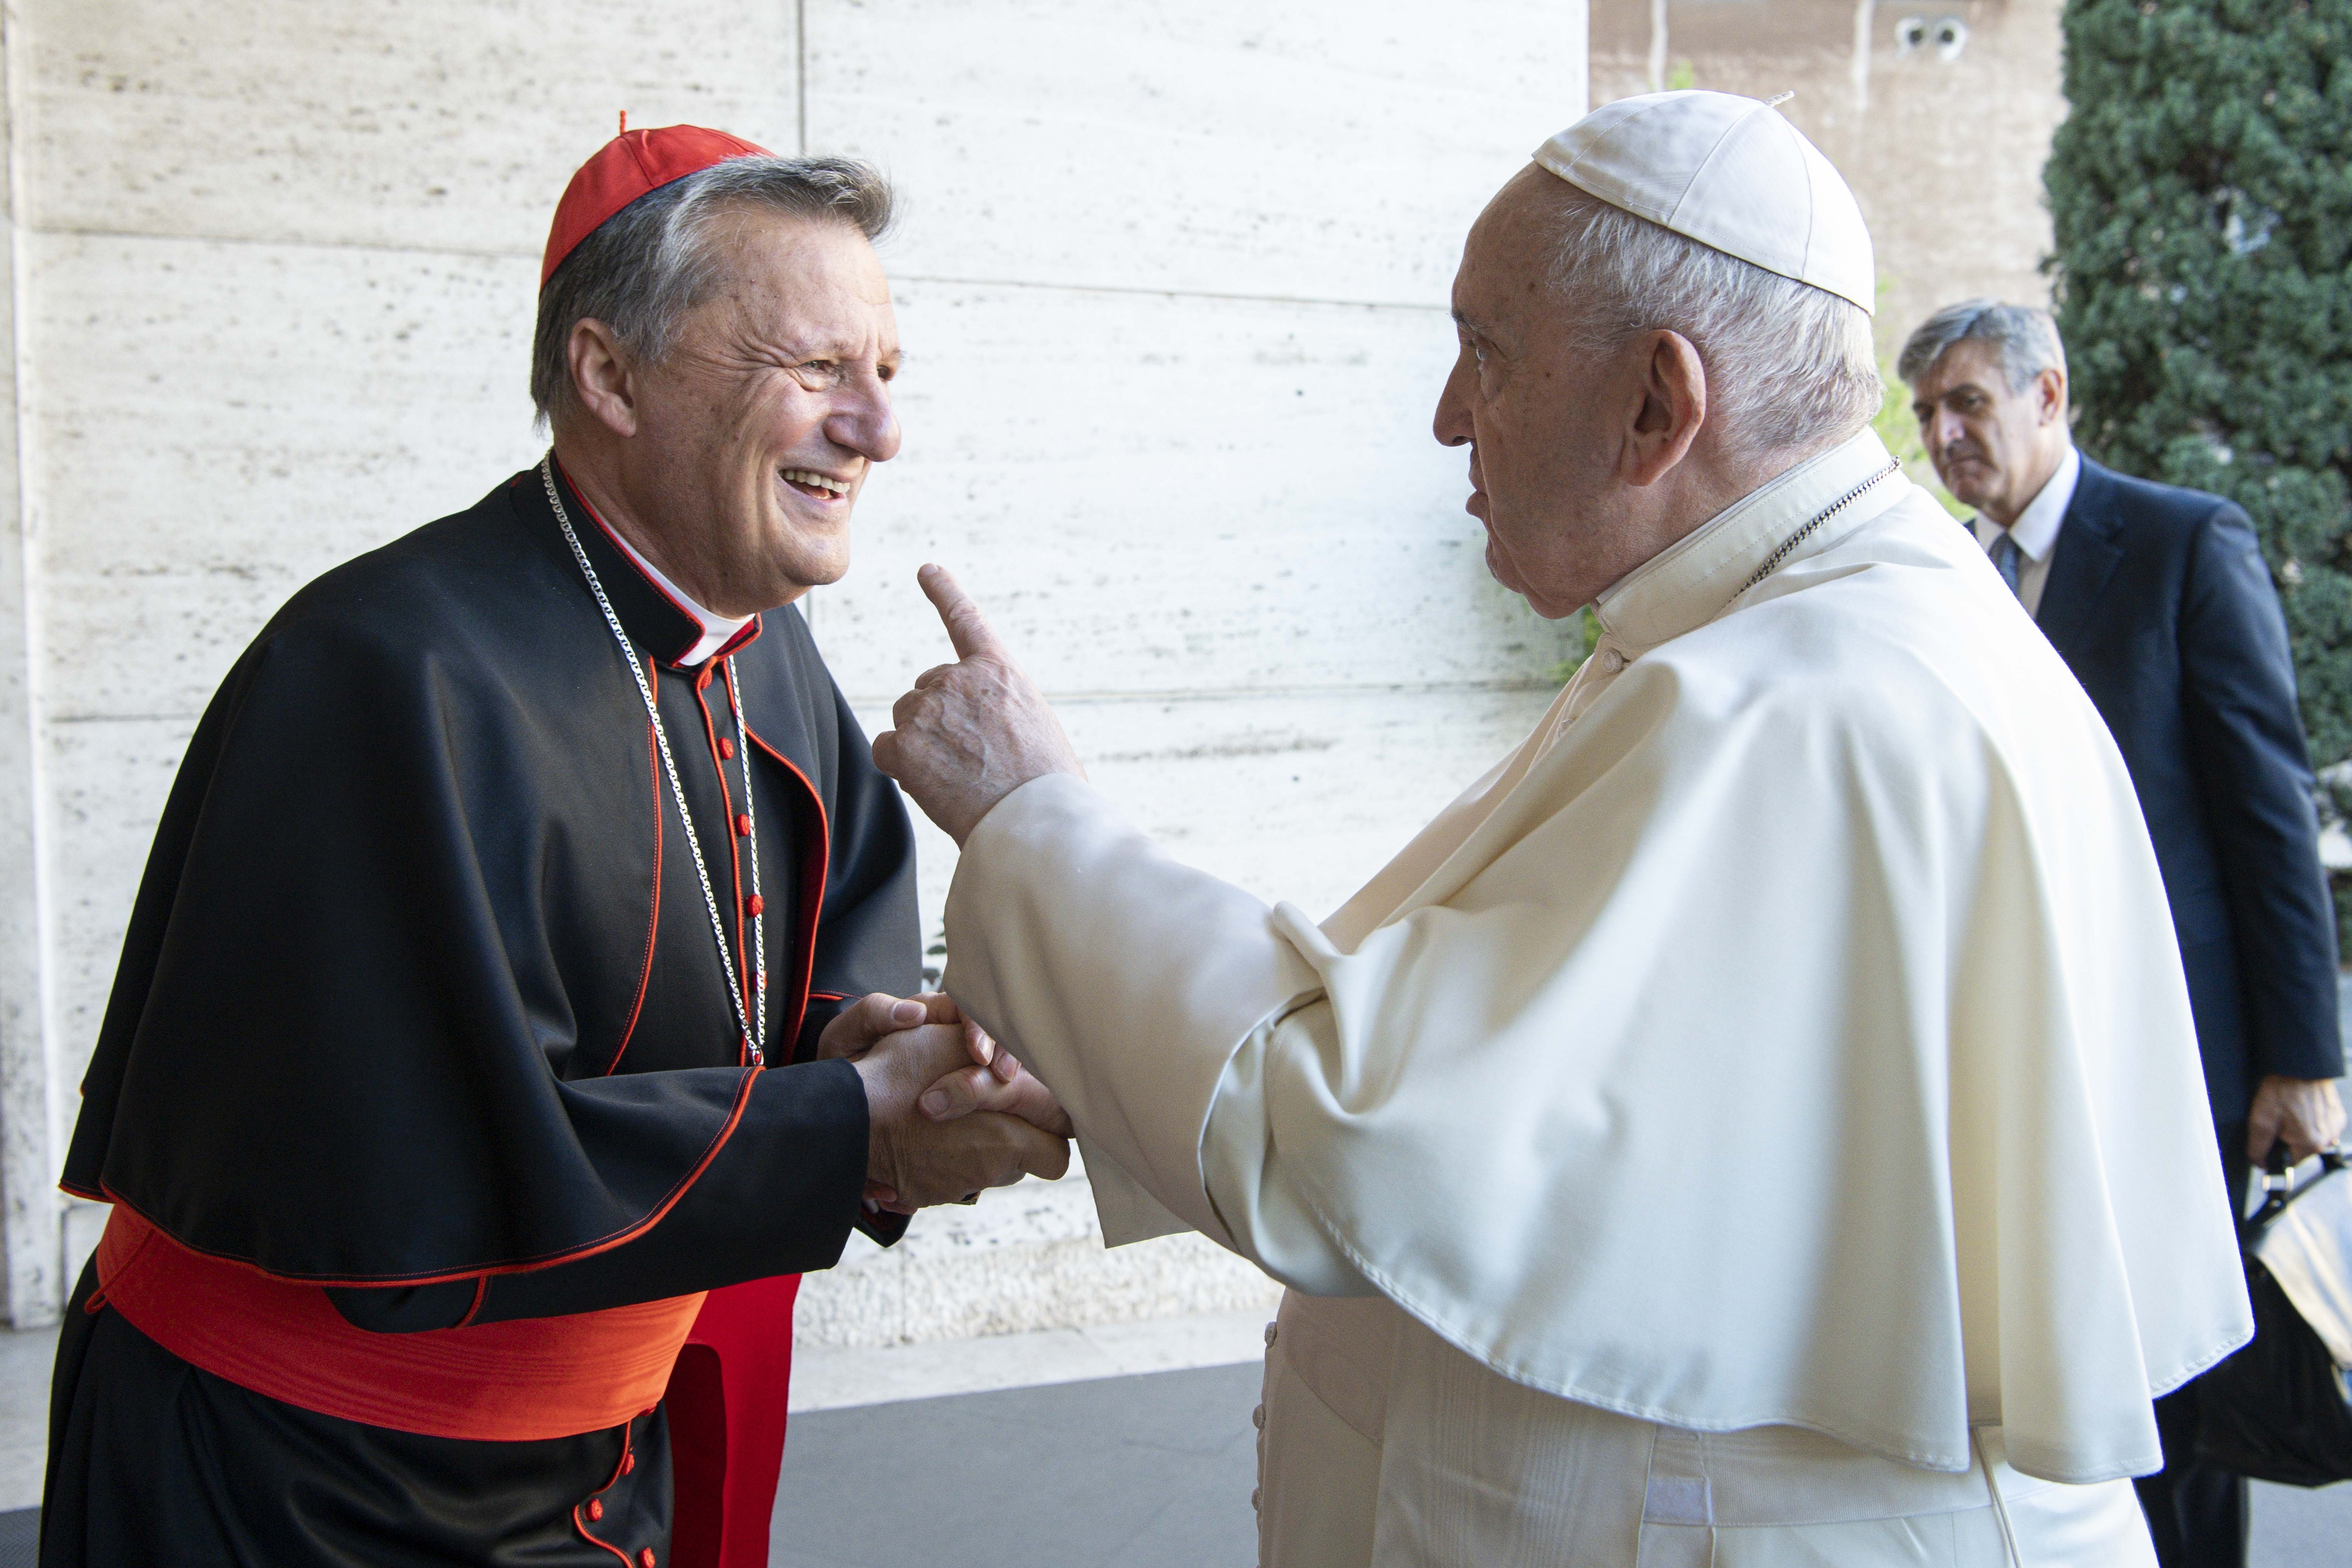 Pope Francis greets Maltese Cardinal Mario Grech, secretary-general of the Synod of Bishops, during a meeting with representatives of bishops' conferences from around the world at the Vatican in this Oct. 9, 2021. (CNS photo/Paul Haring)